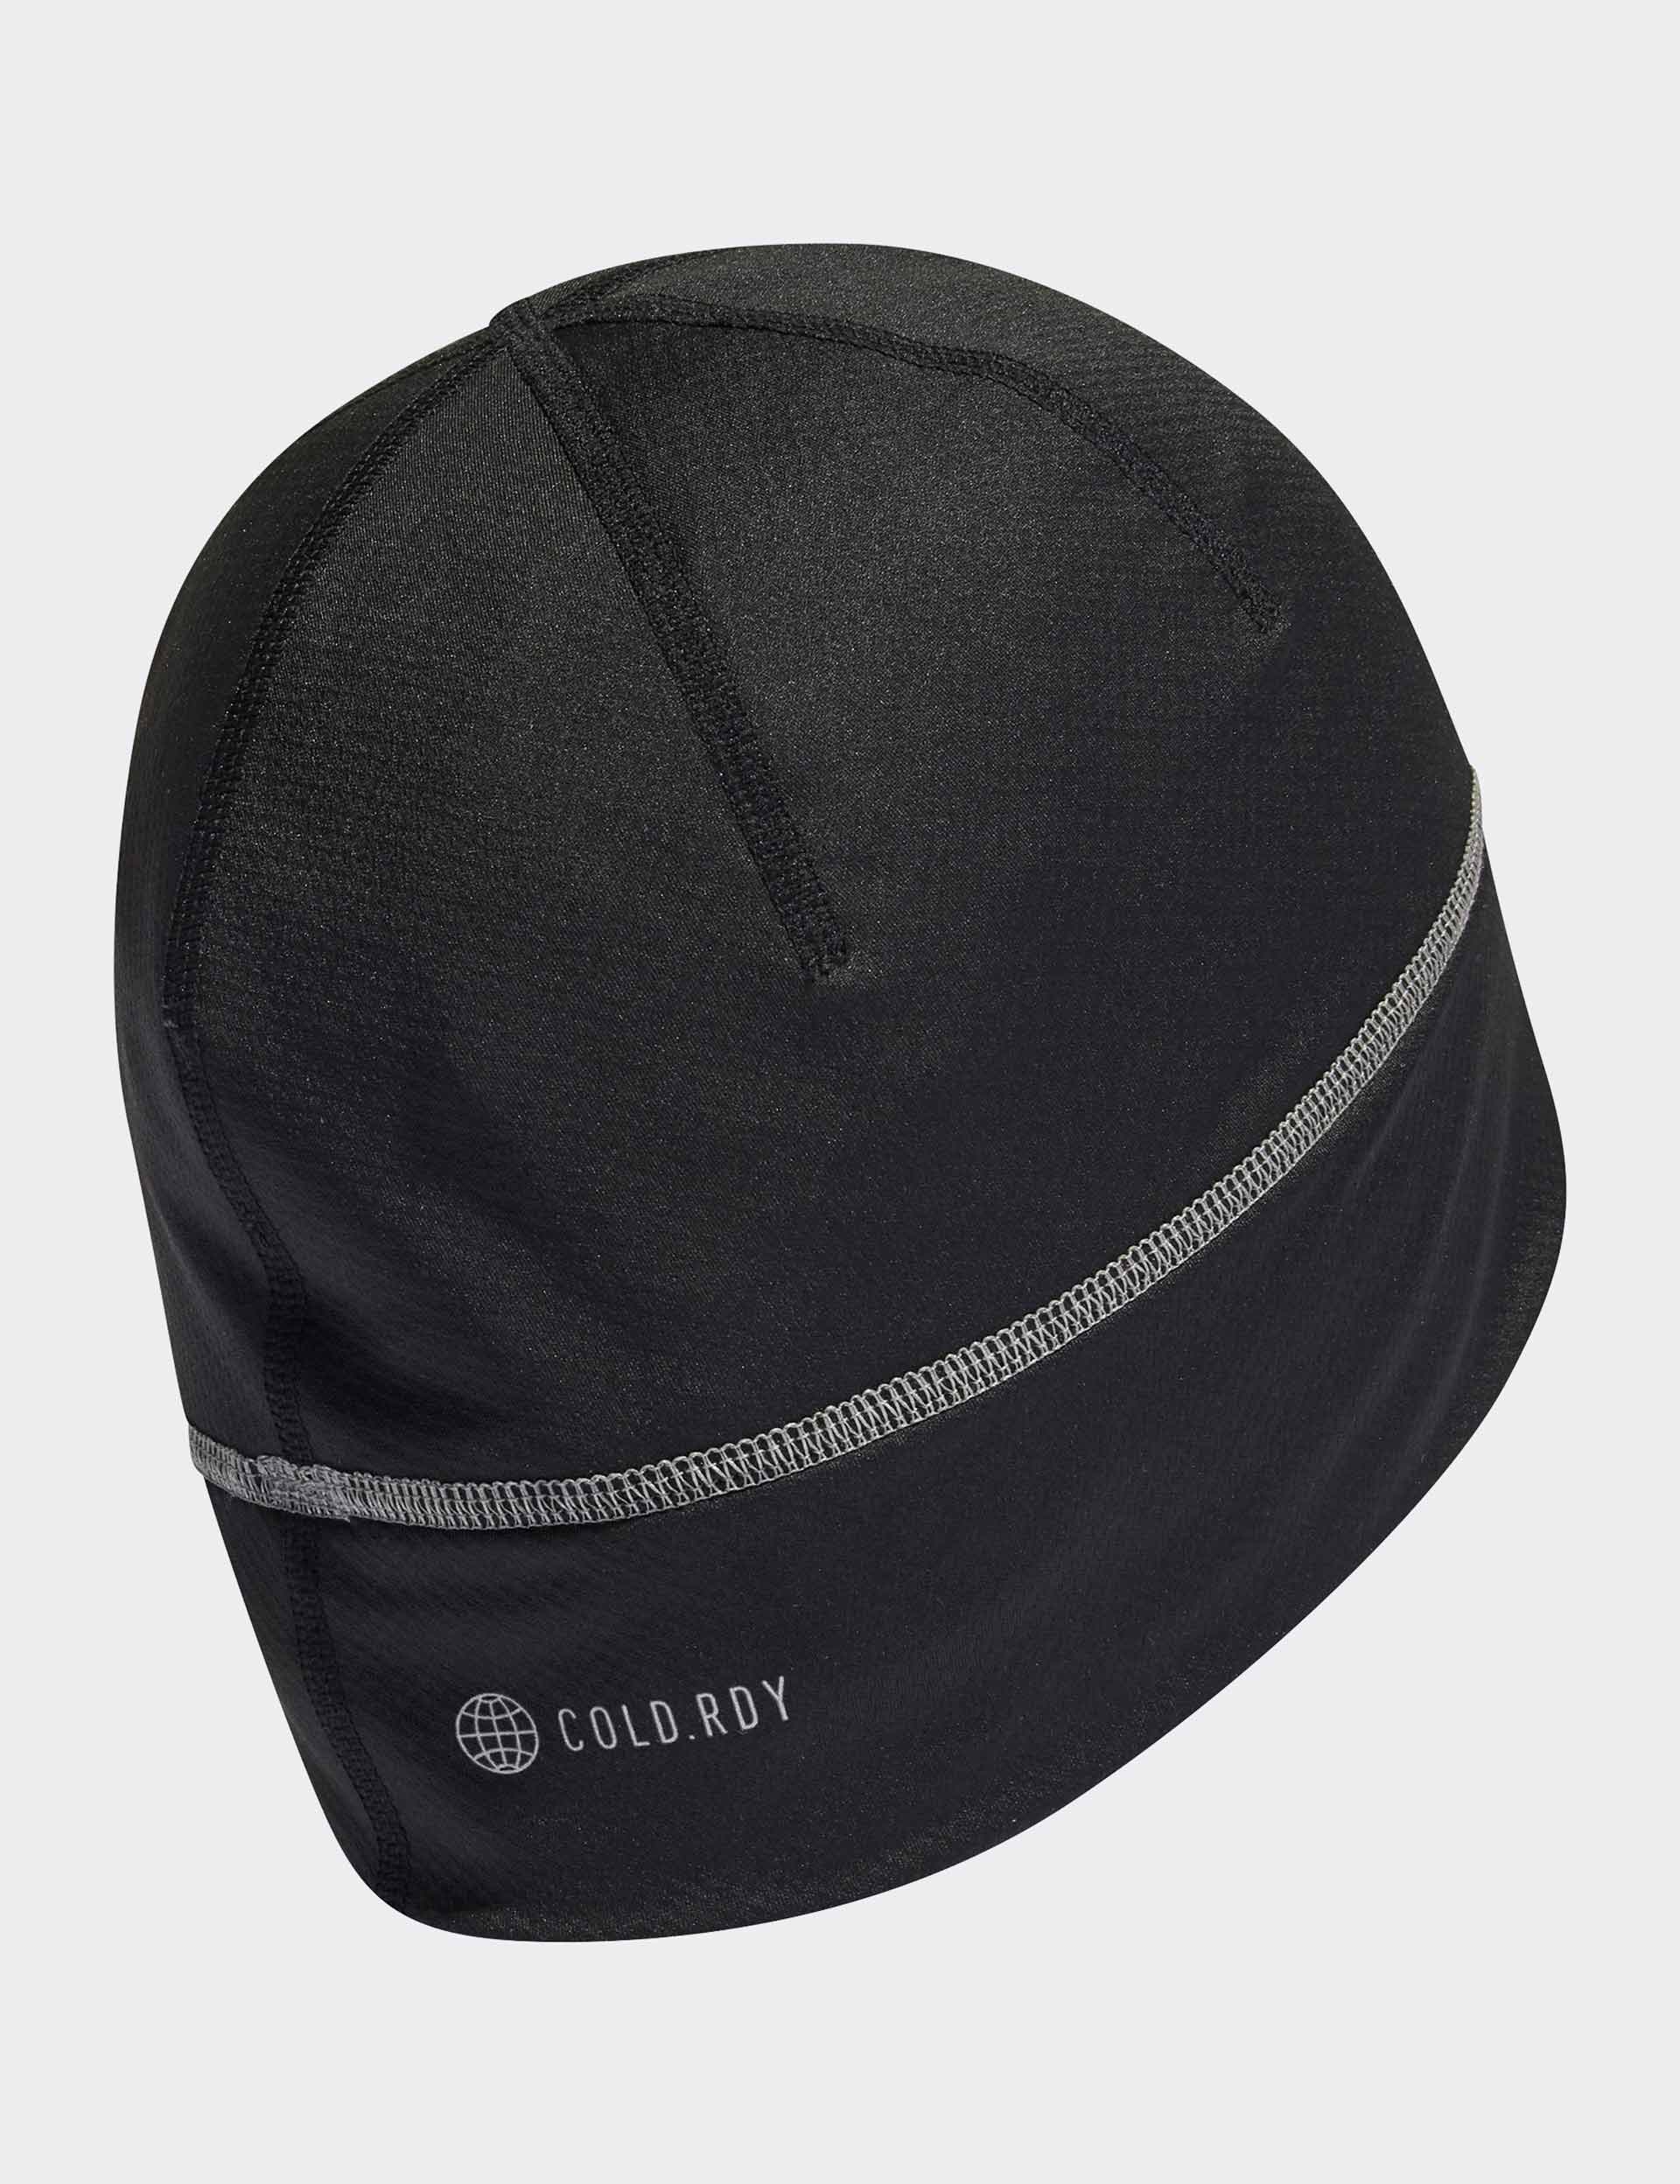 Adidas COLD.RDY Running Training Beanie - Blackimages2- The Sports Edit